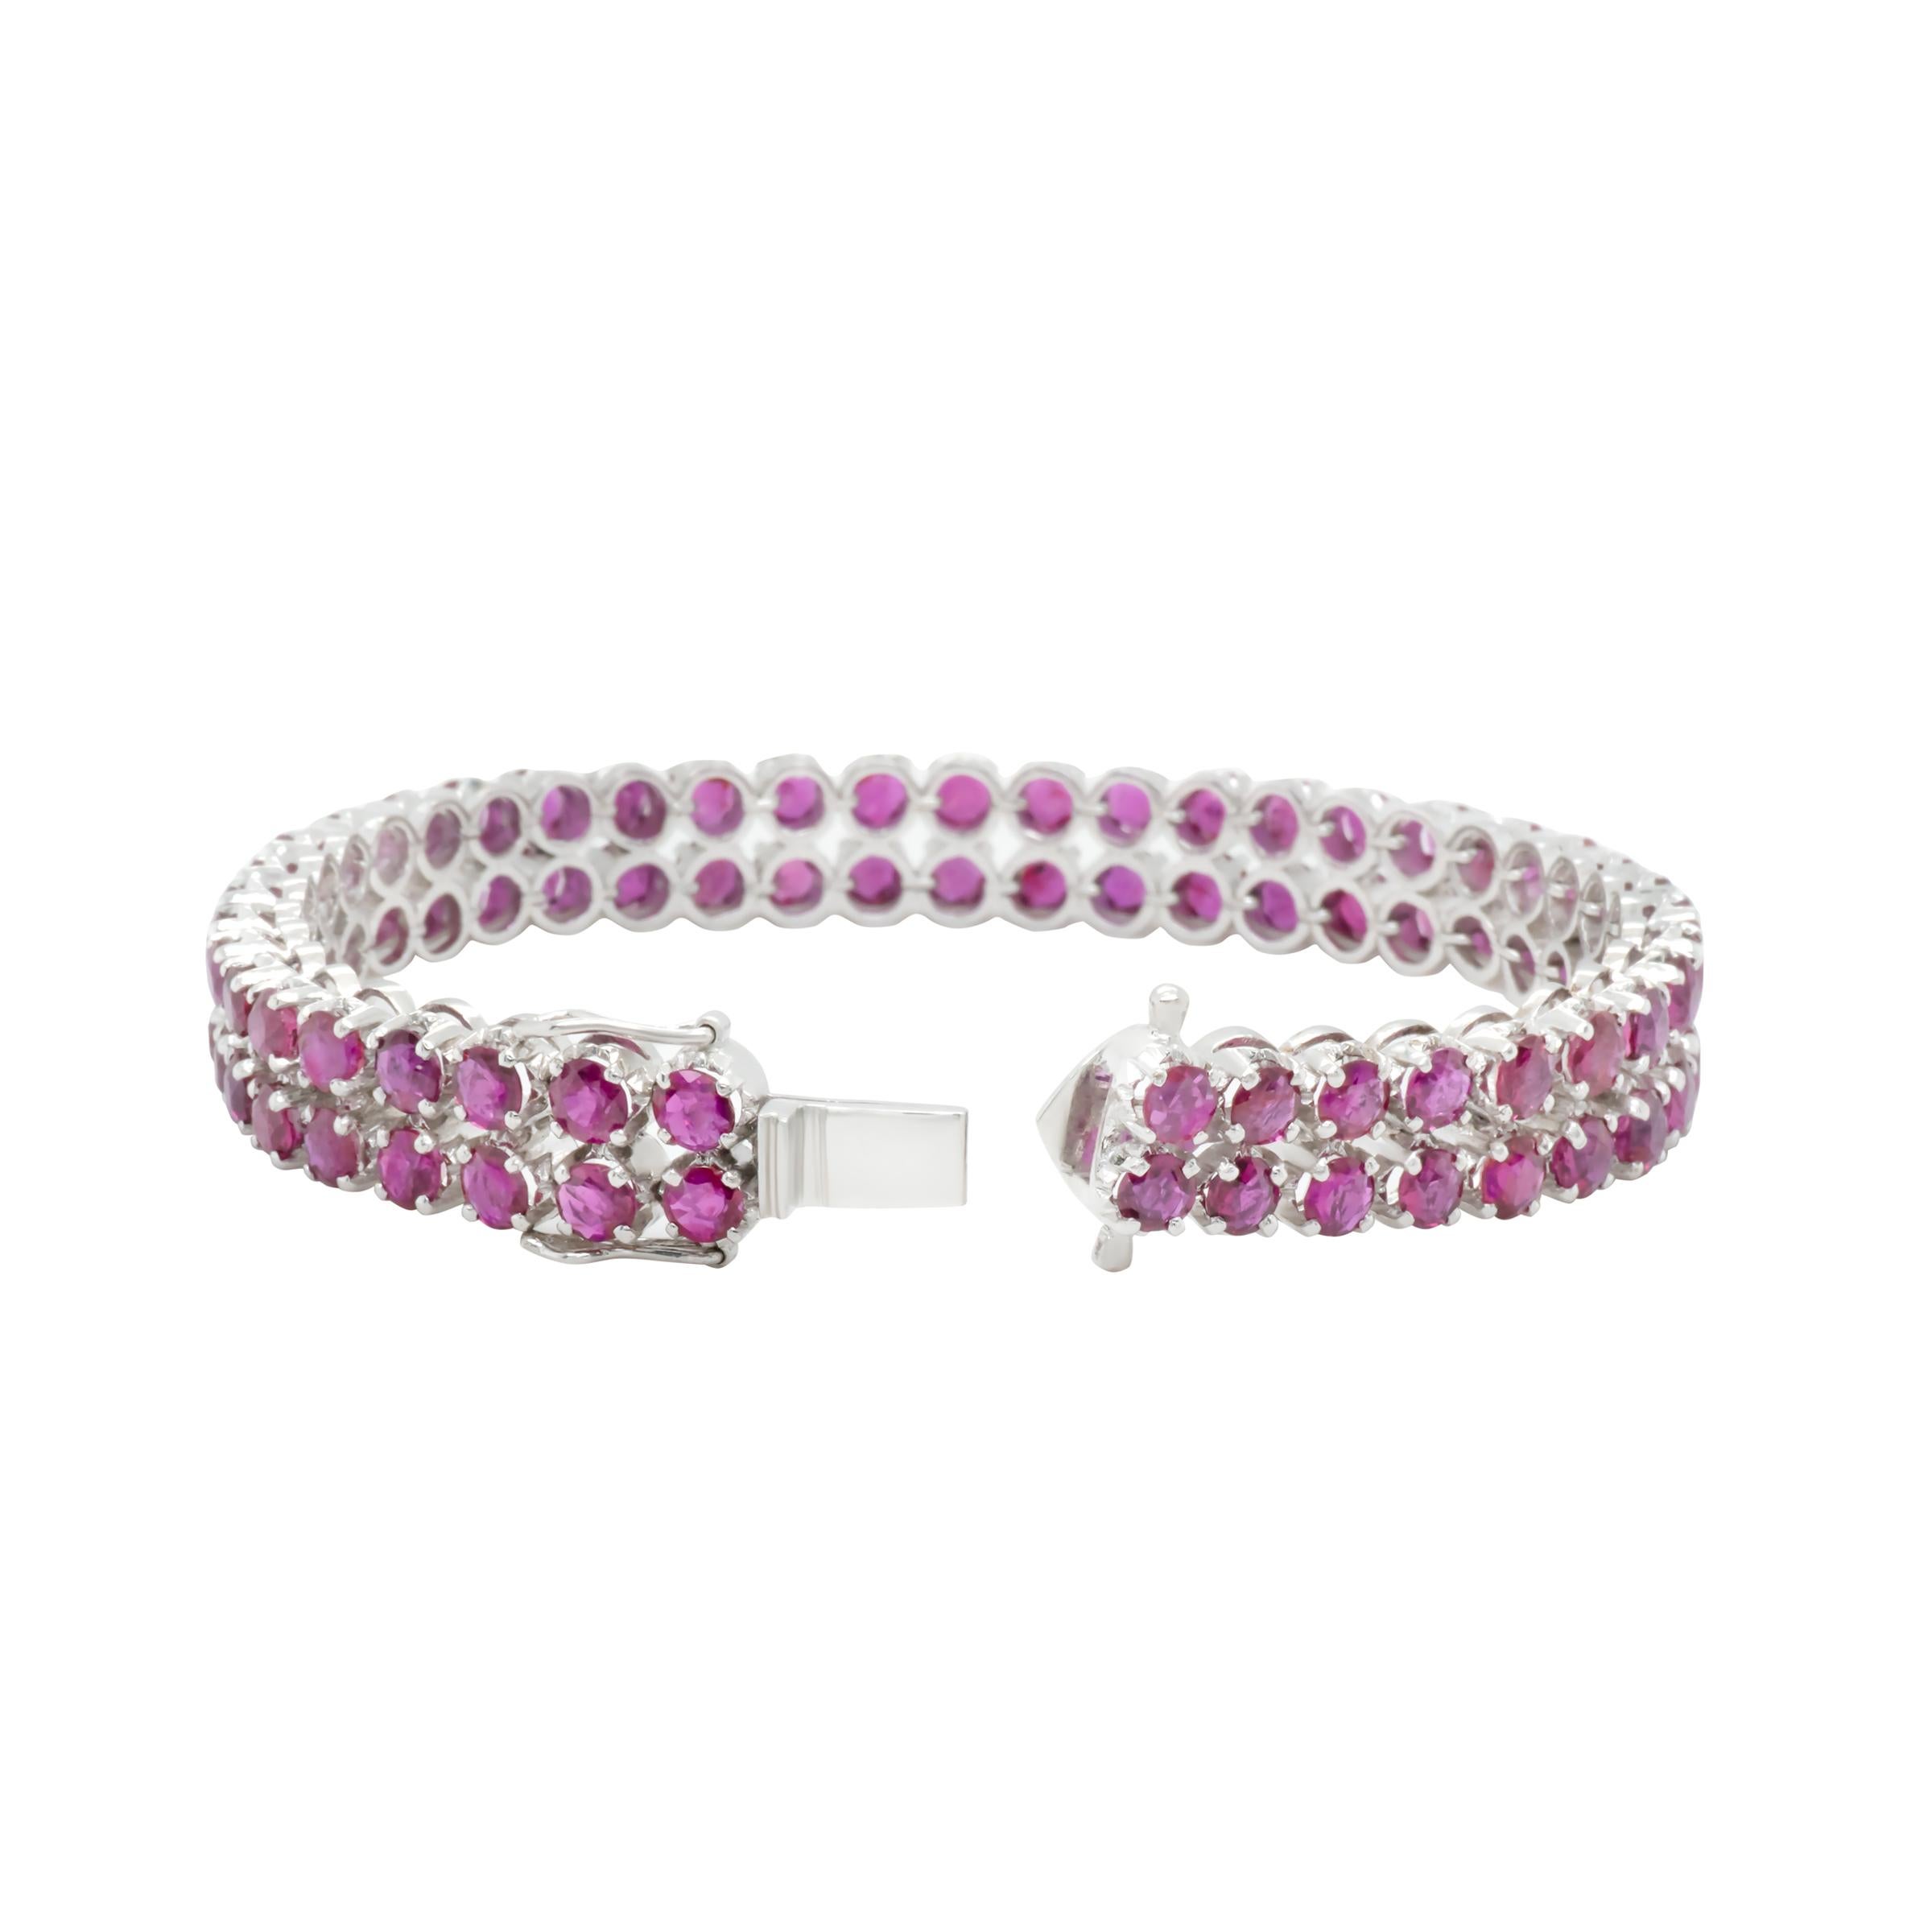 A charming white gold and ruby tennis bracelet.  This two row prong set ruby bracelet is perfectly aligned to create a bold yet delicate piece of jewelry.

Ruby 82 pcs
Size 4.0 mm
Total 27.88 cts

Length: 7.2 inch
Height: 8mm 
